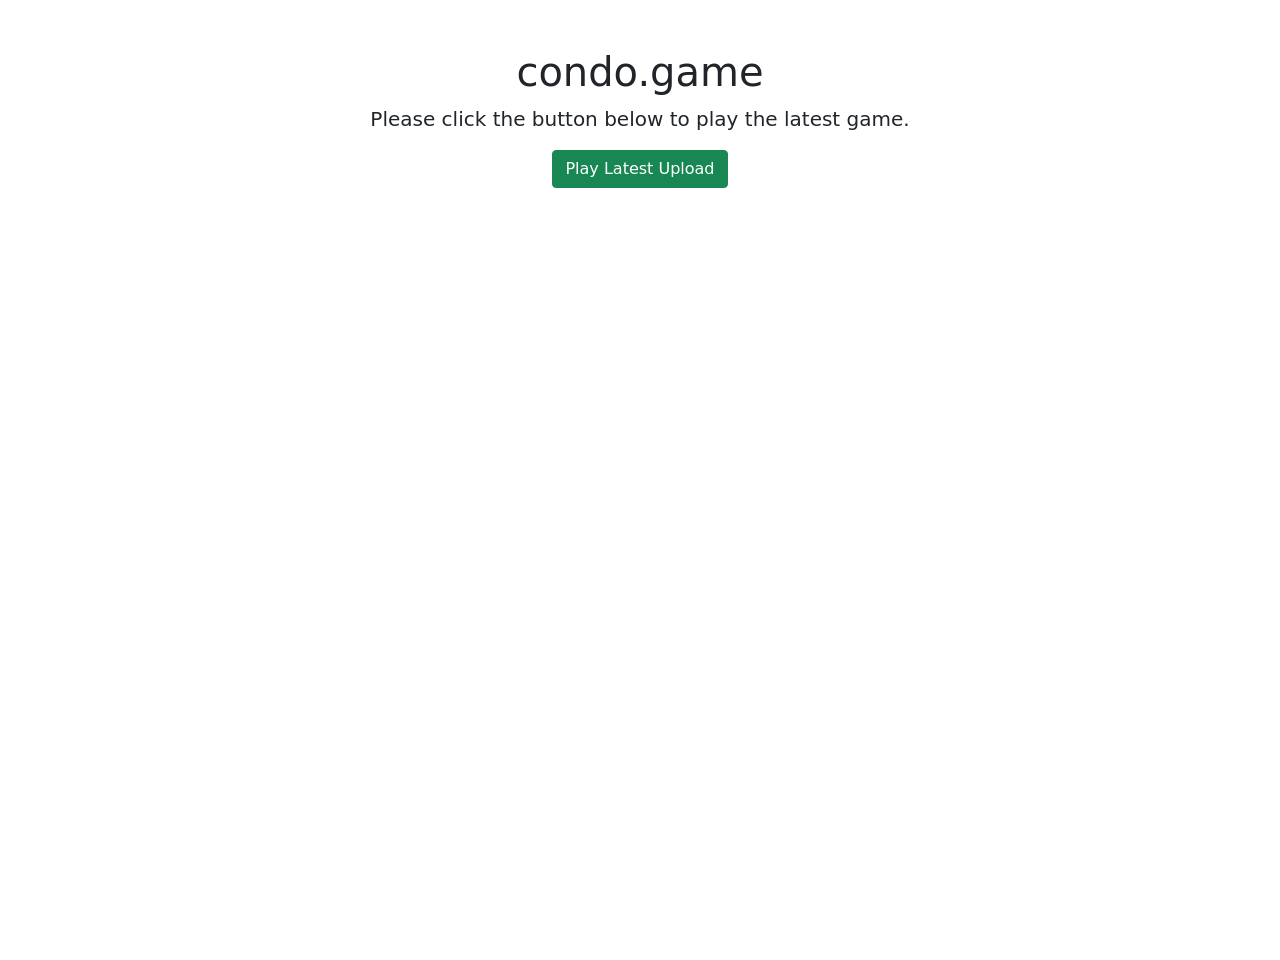 GitHub - RobloxThot/OldRCondoSite: Source code to my old Roblox Condo site  (not auto uploader!)